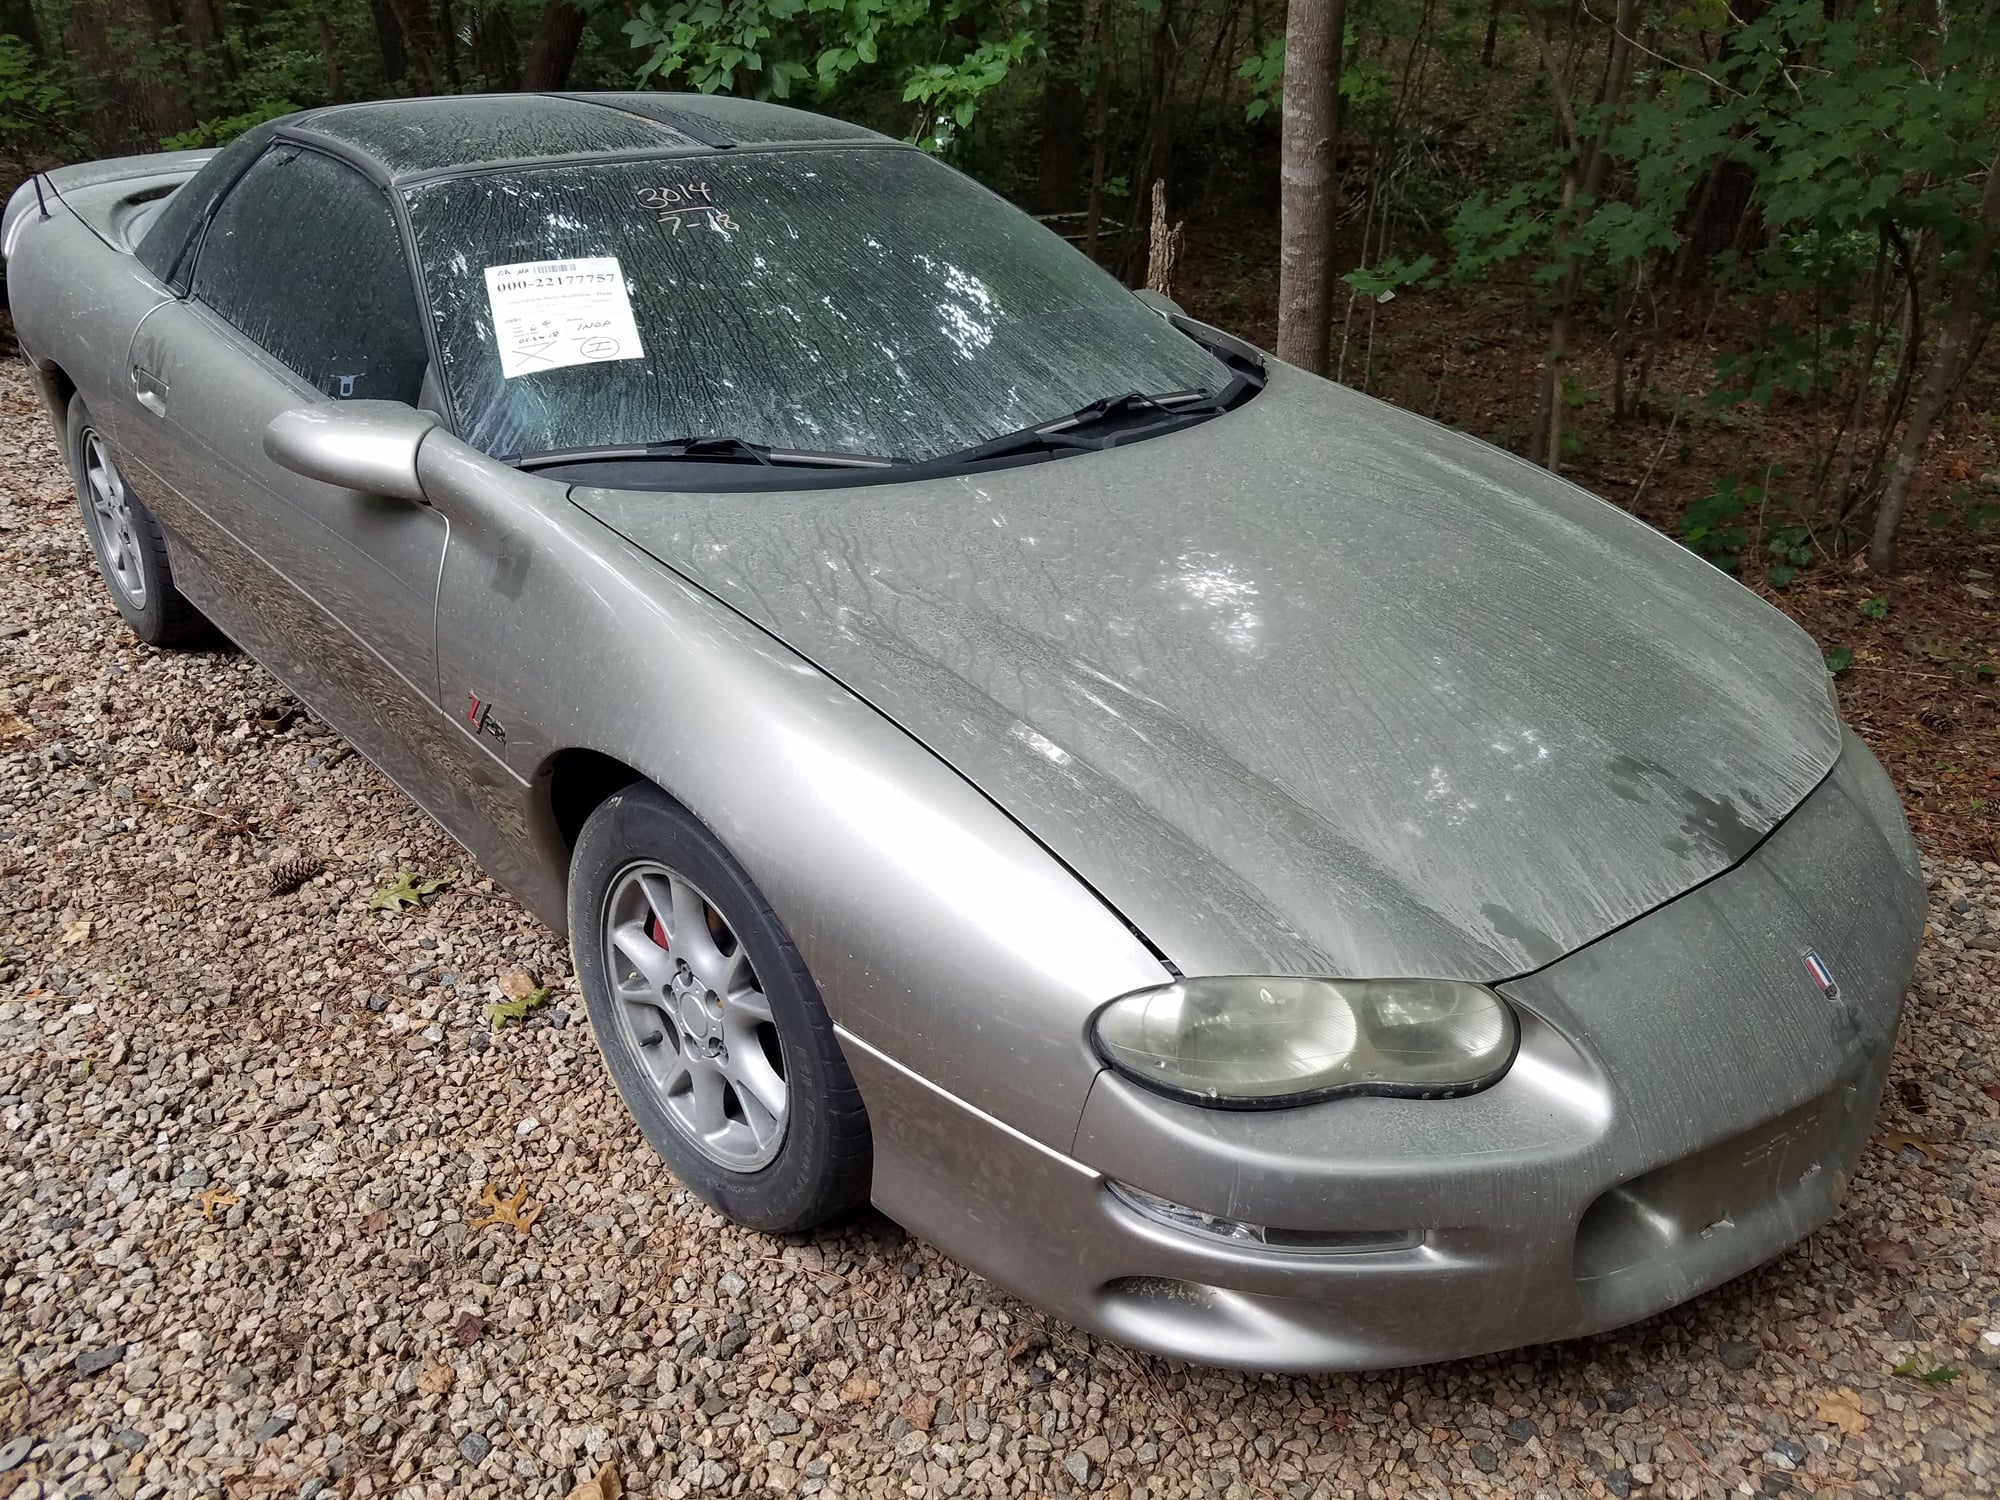 2002 Pontiac Firebird - Parting out 2001 Camaro Z28 roller - Wake Forest/creedmoor, NC 27587, United States